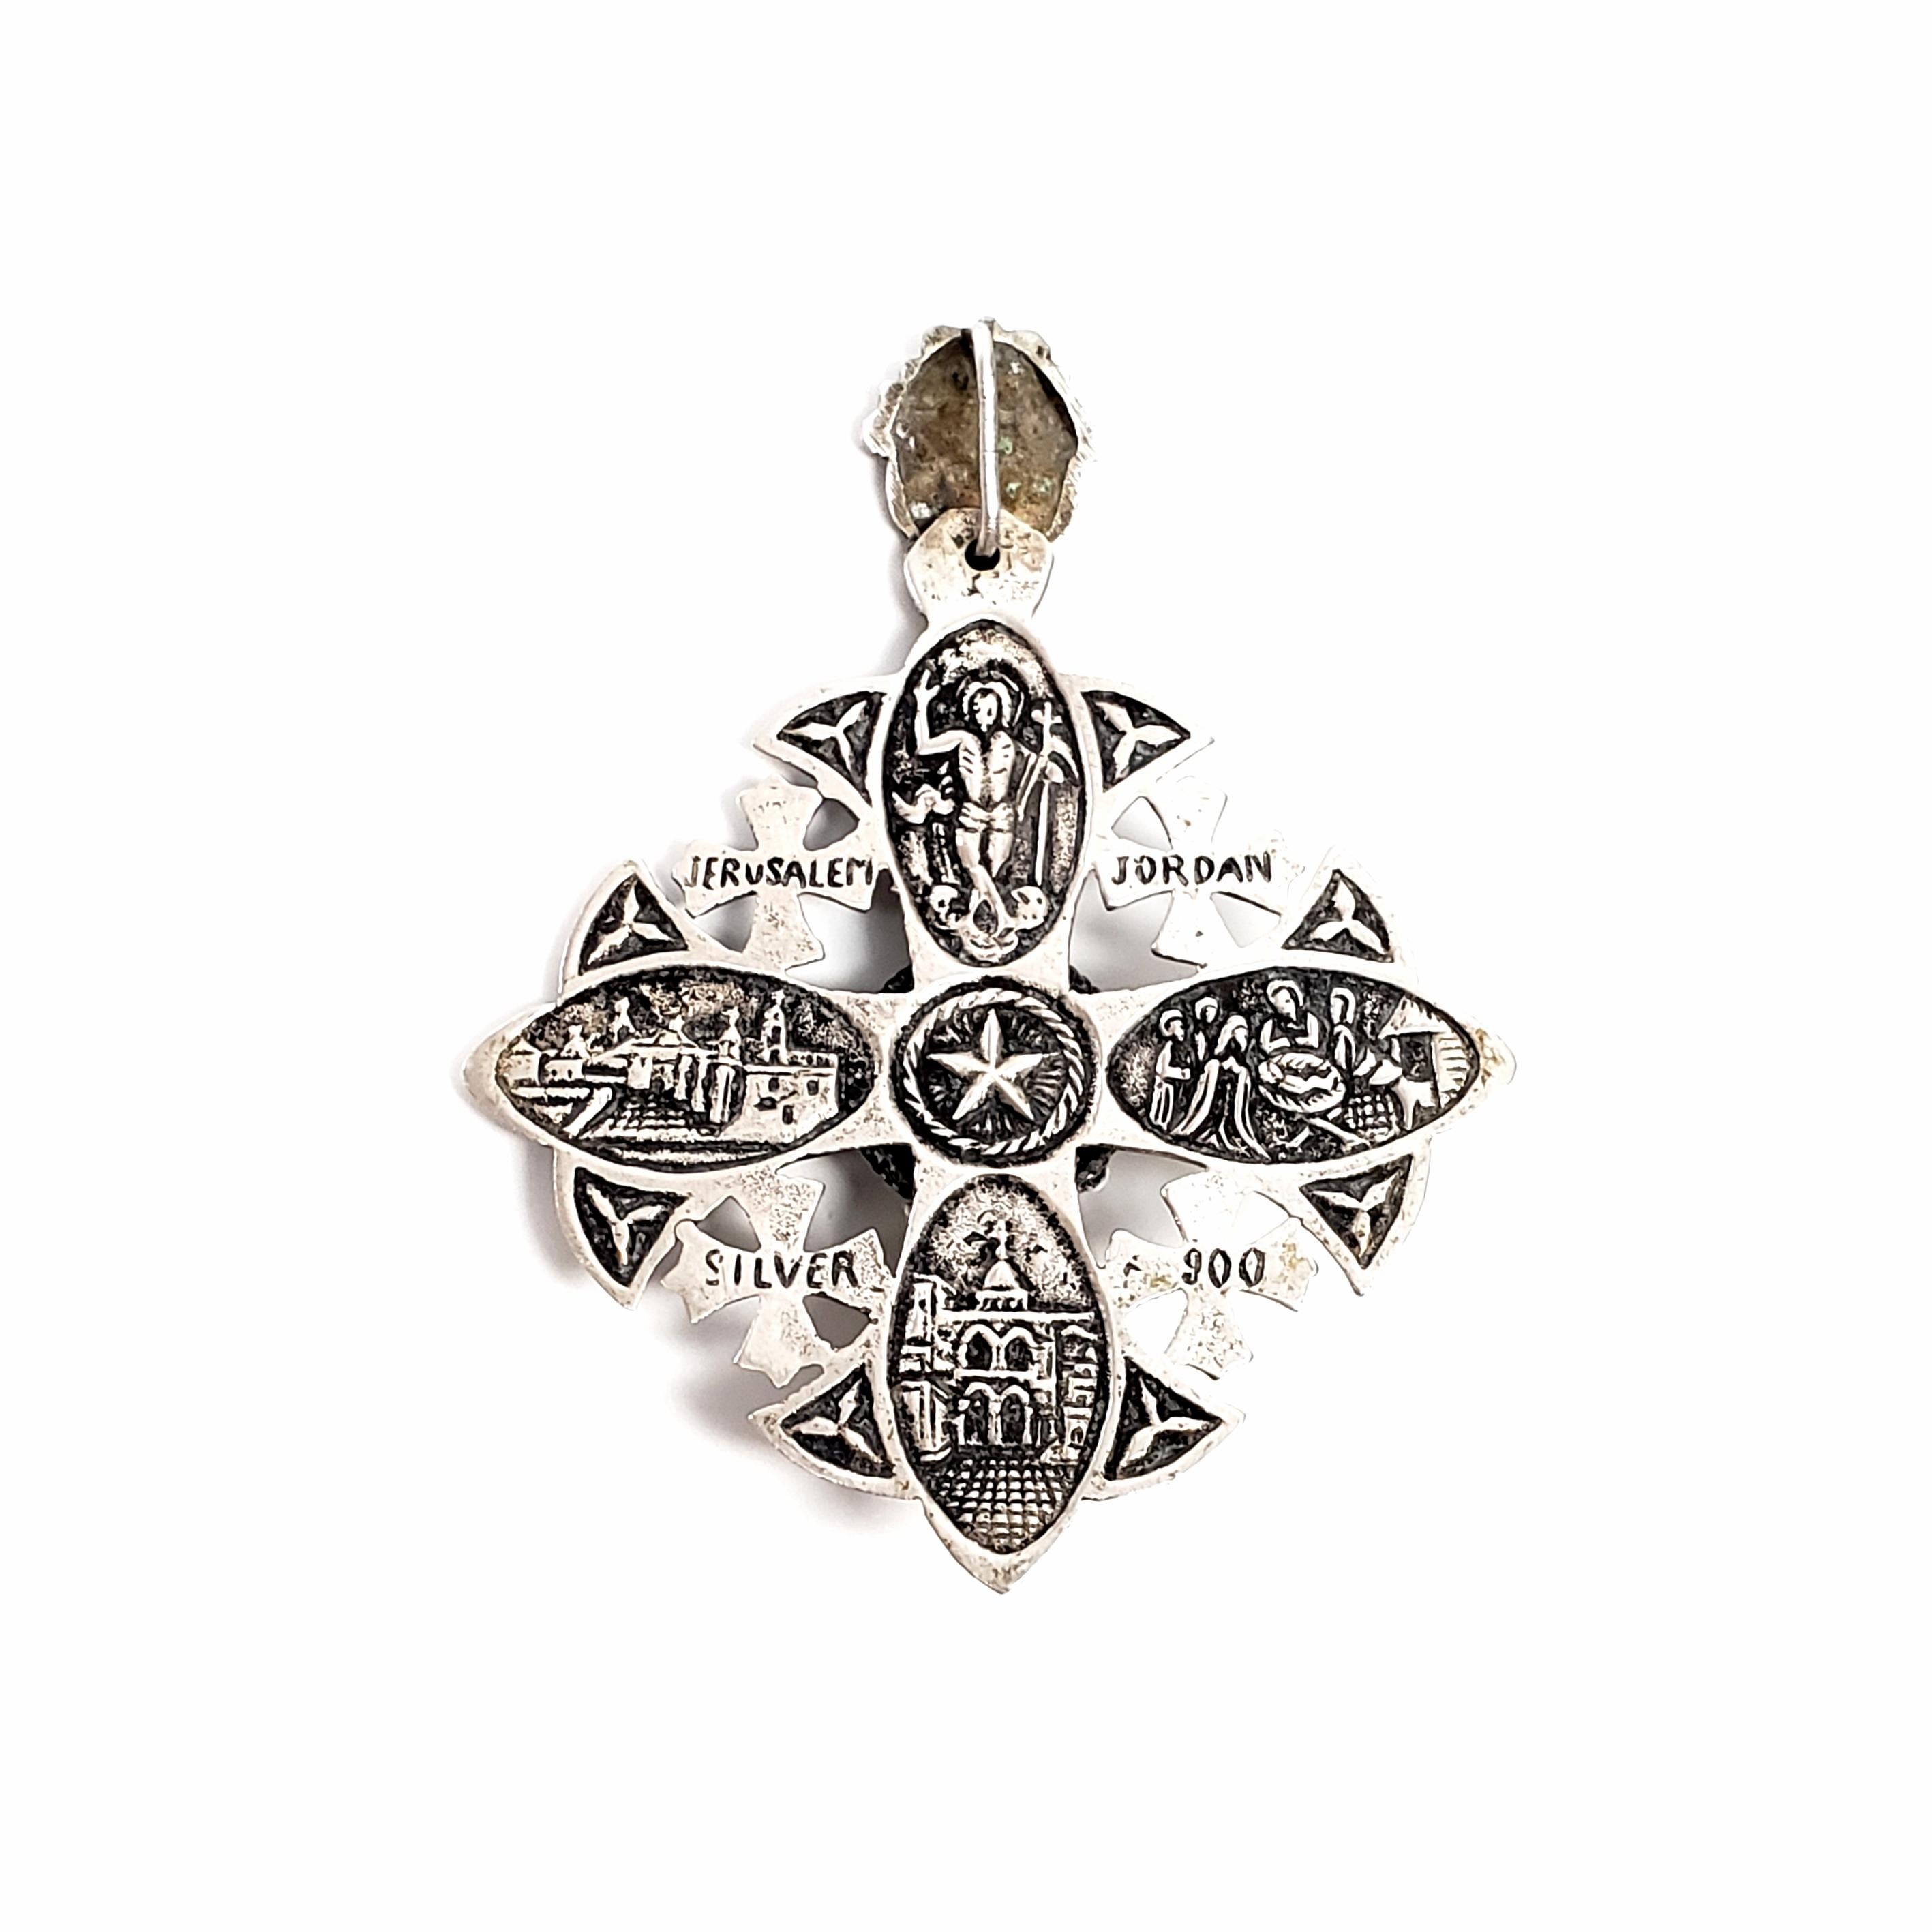 Vintage sterling silver crusaders cross pendent.

Beautifully ornate design on the front, etched religious scenes on the back.

Measures 2 5/8